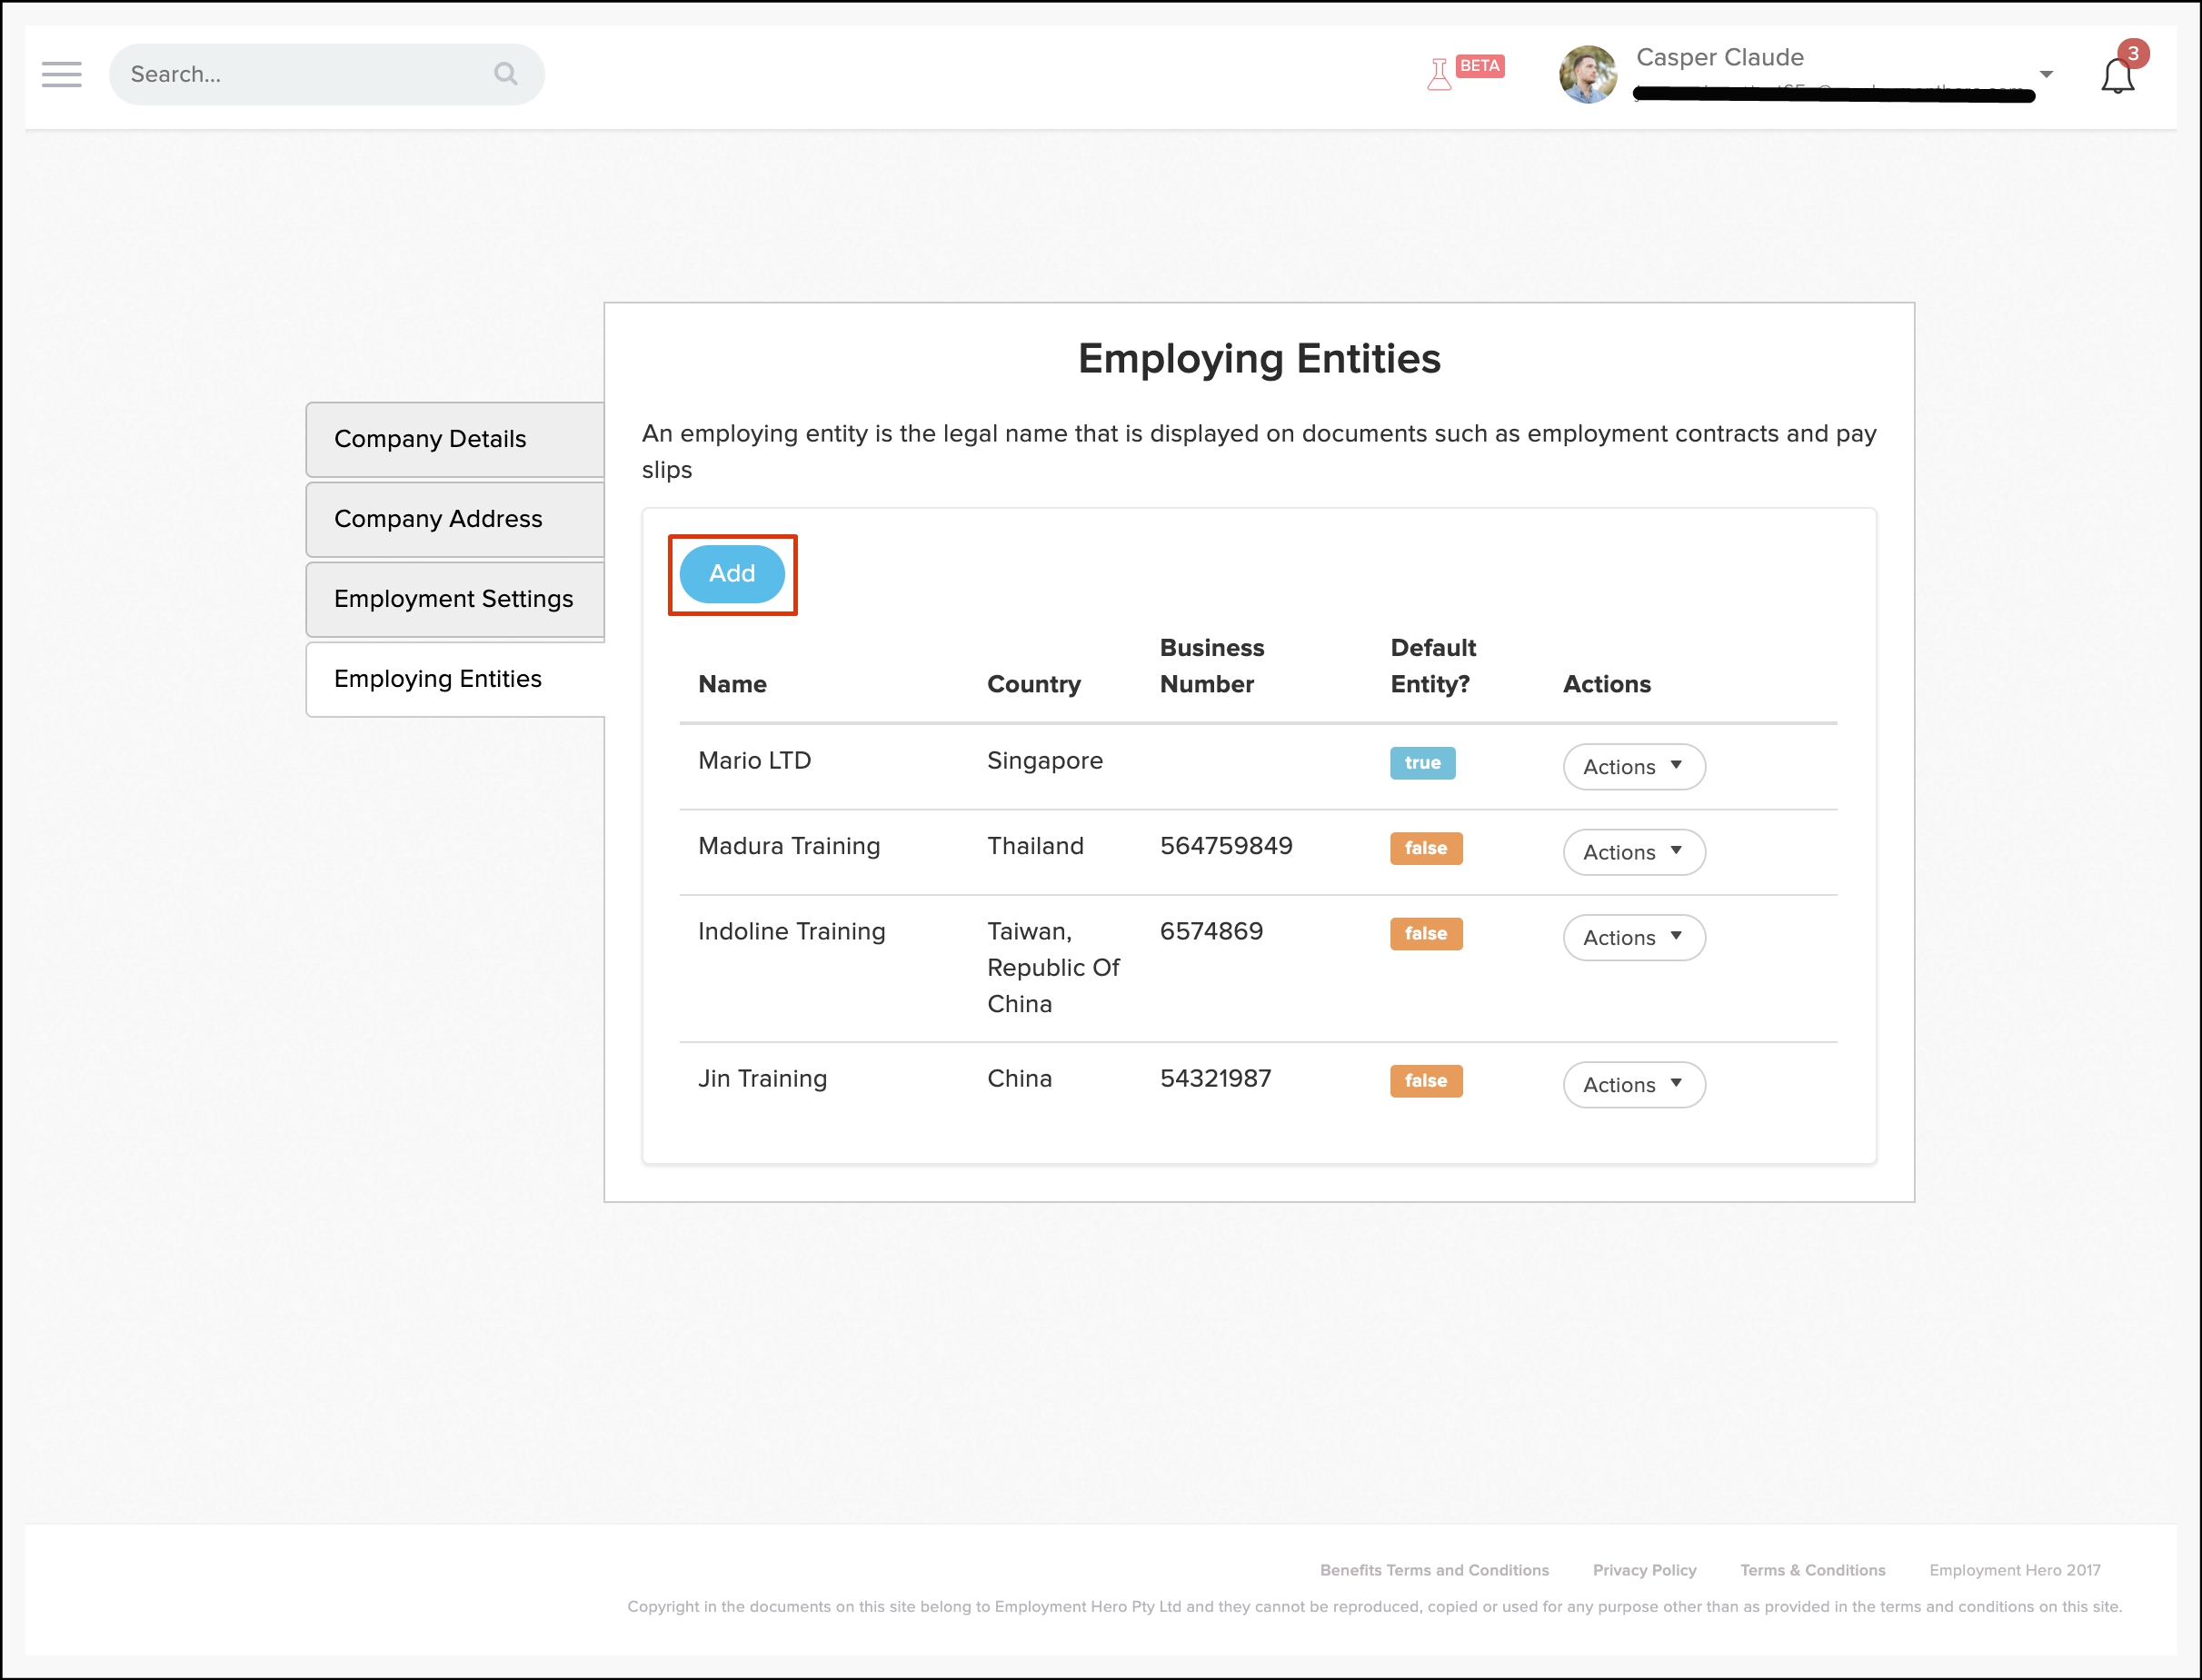 screenshot of the employing entities page. to the left of the screen you have the options company details, company address, employment settings, employing entities. employing entities is selected. on the screen reads employing entities. an employing entity is the legal name that is displayed on documents such as employment contracts and pay slips. below is an add button highlighted in red. below that is a table of company names vertically. horizontally they are sorted by name, country, business number, default entry status and action option.